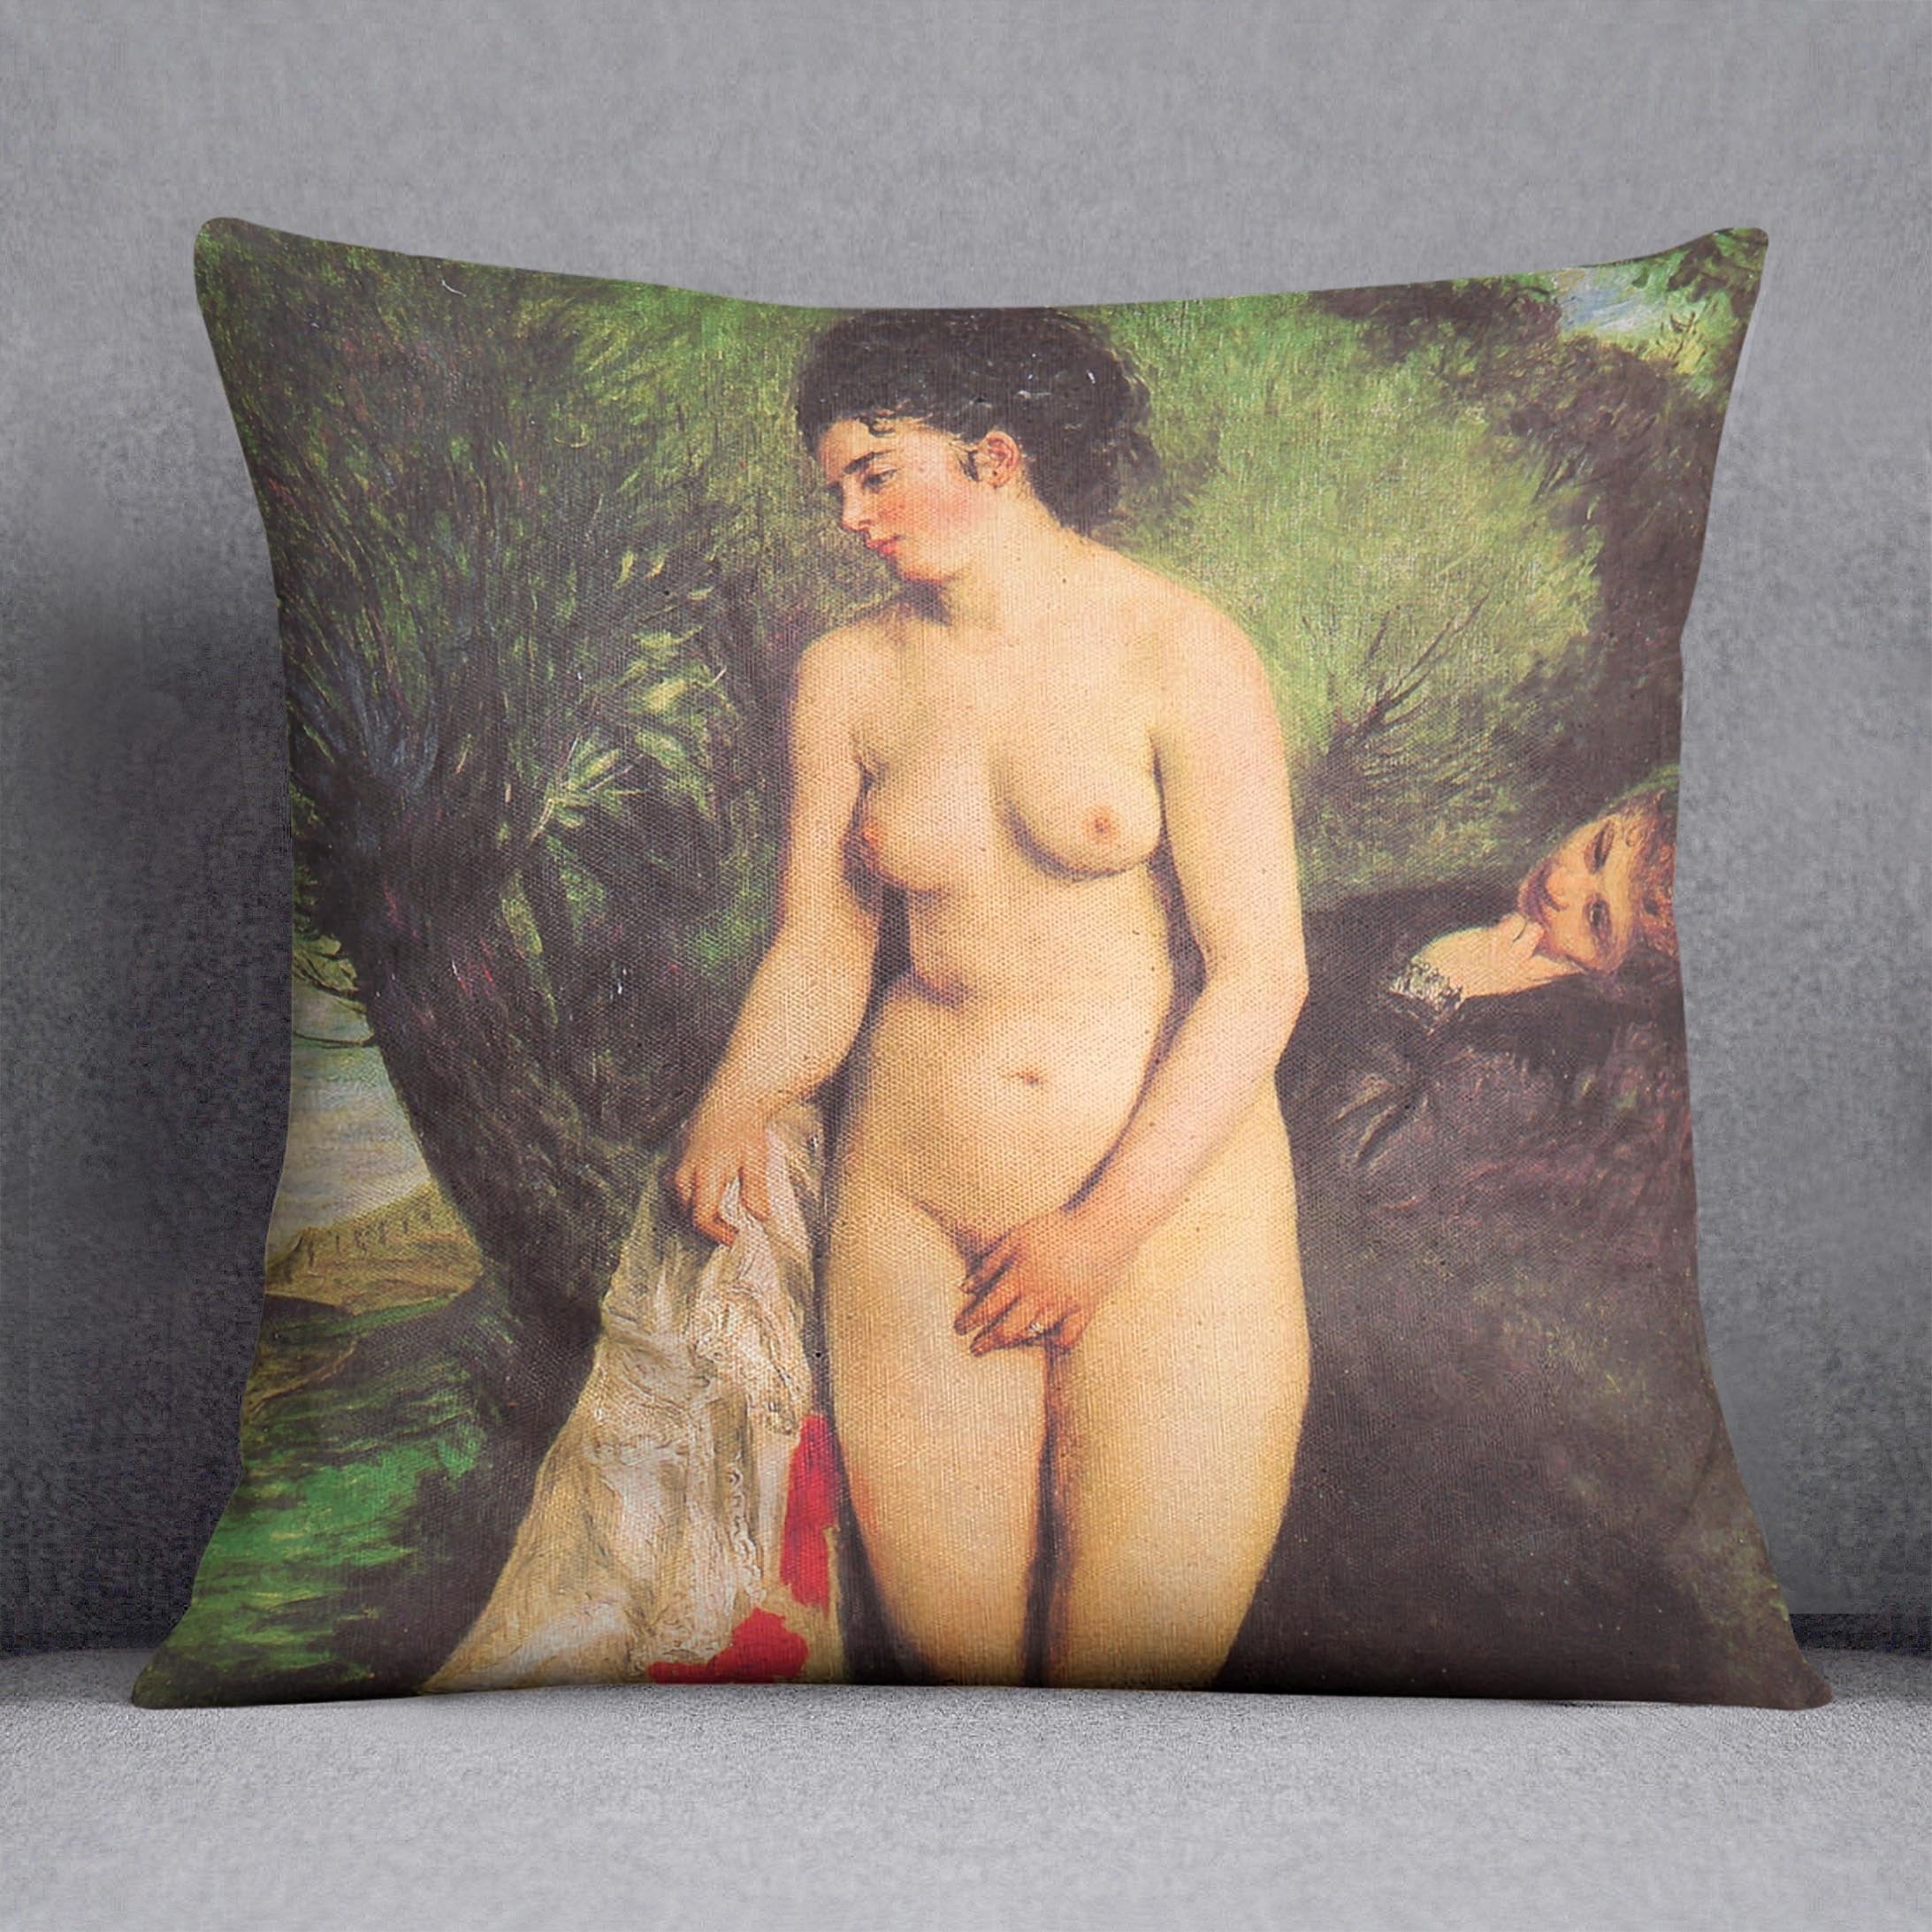 Bather with a Terrier by Renoir Throw Pillow